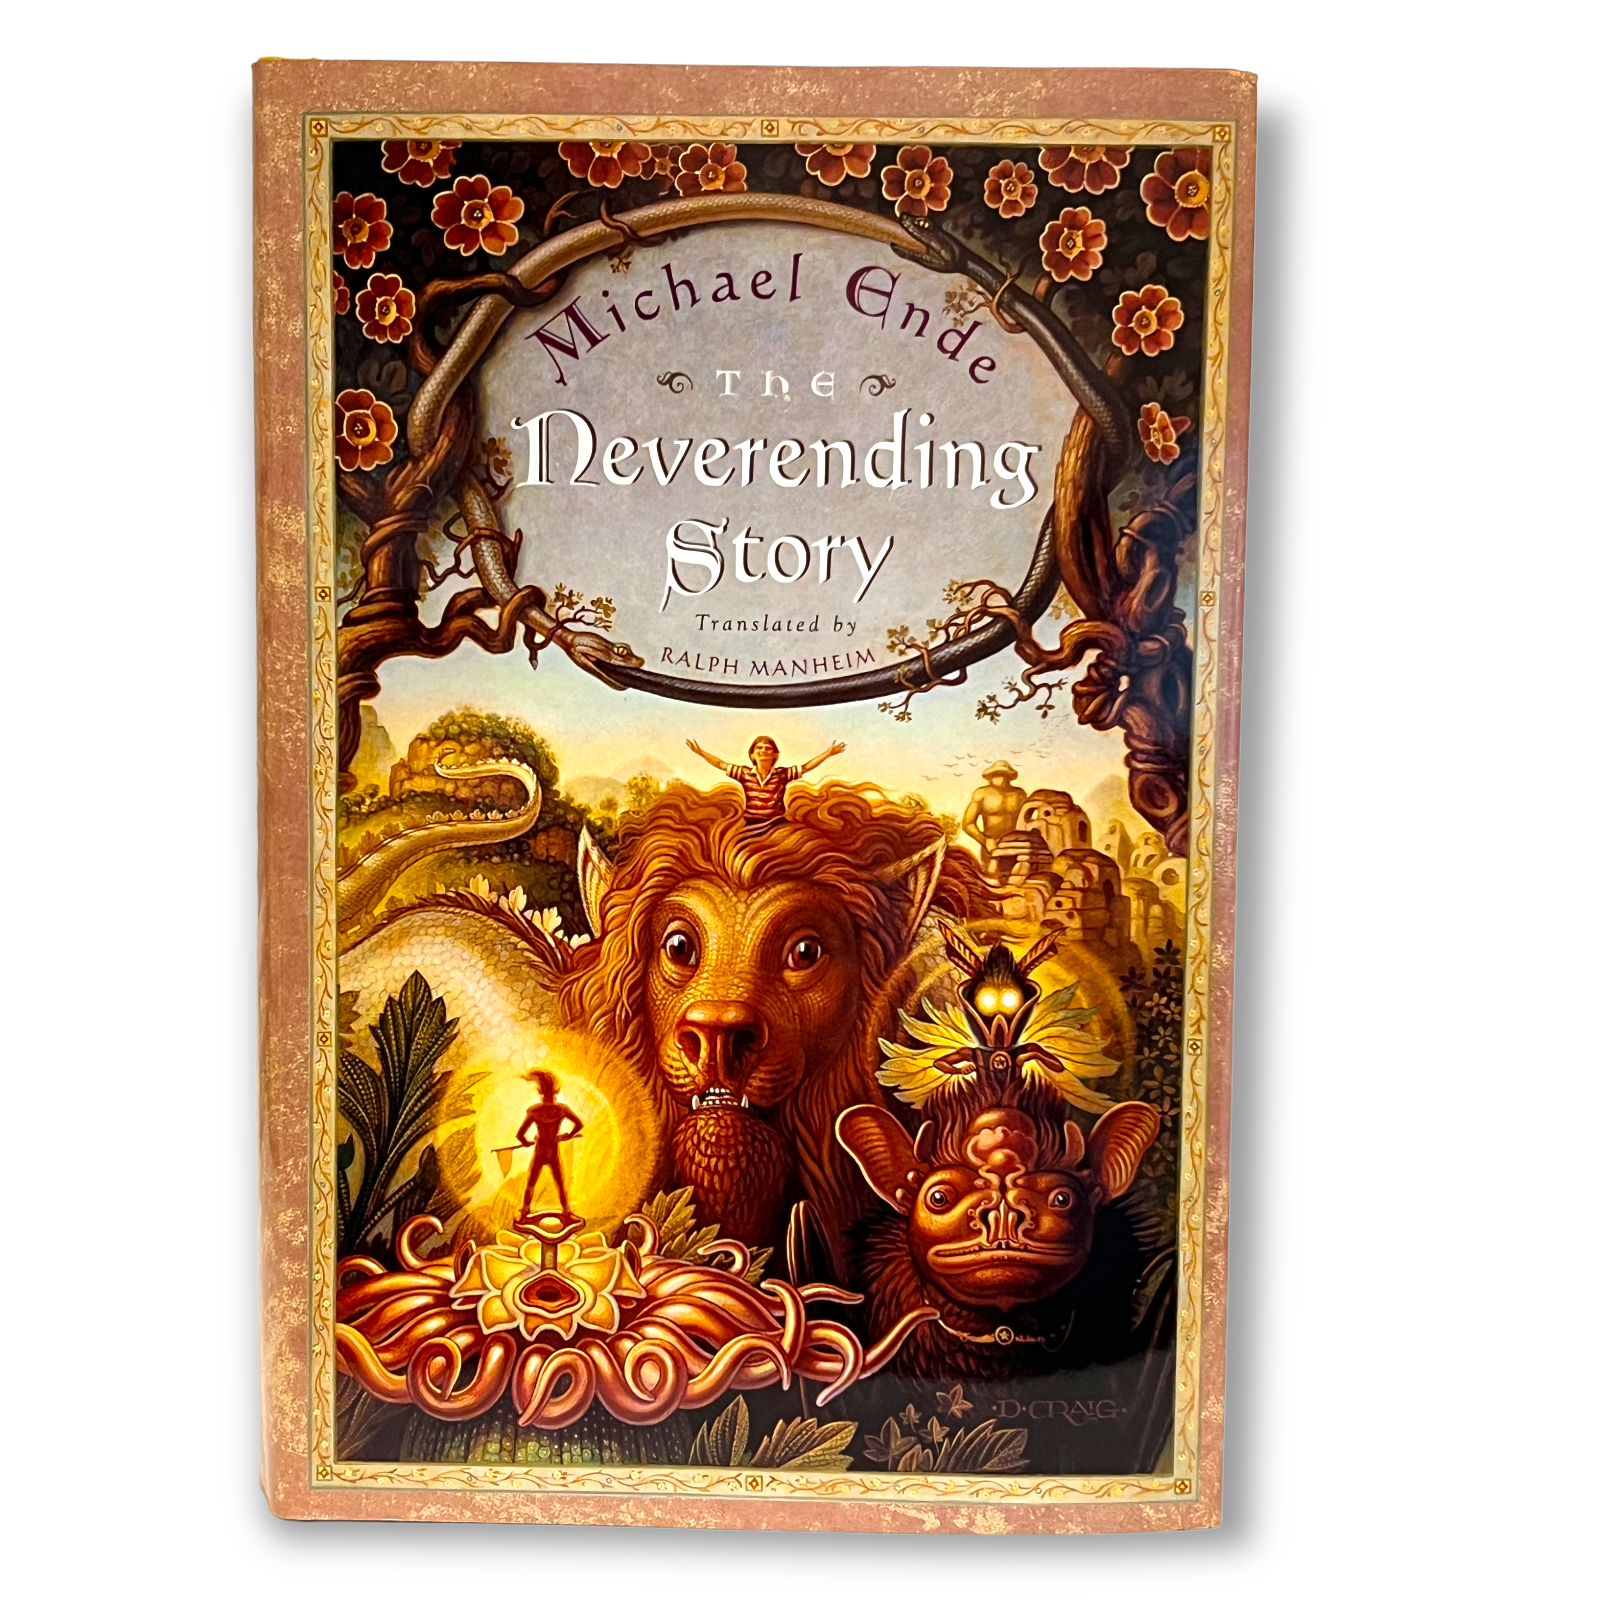 Listen Free to La historia interminable by Michael Ende with a Free Trial.